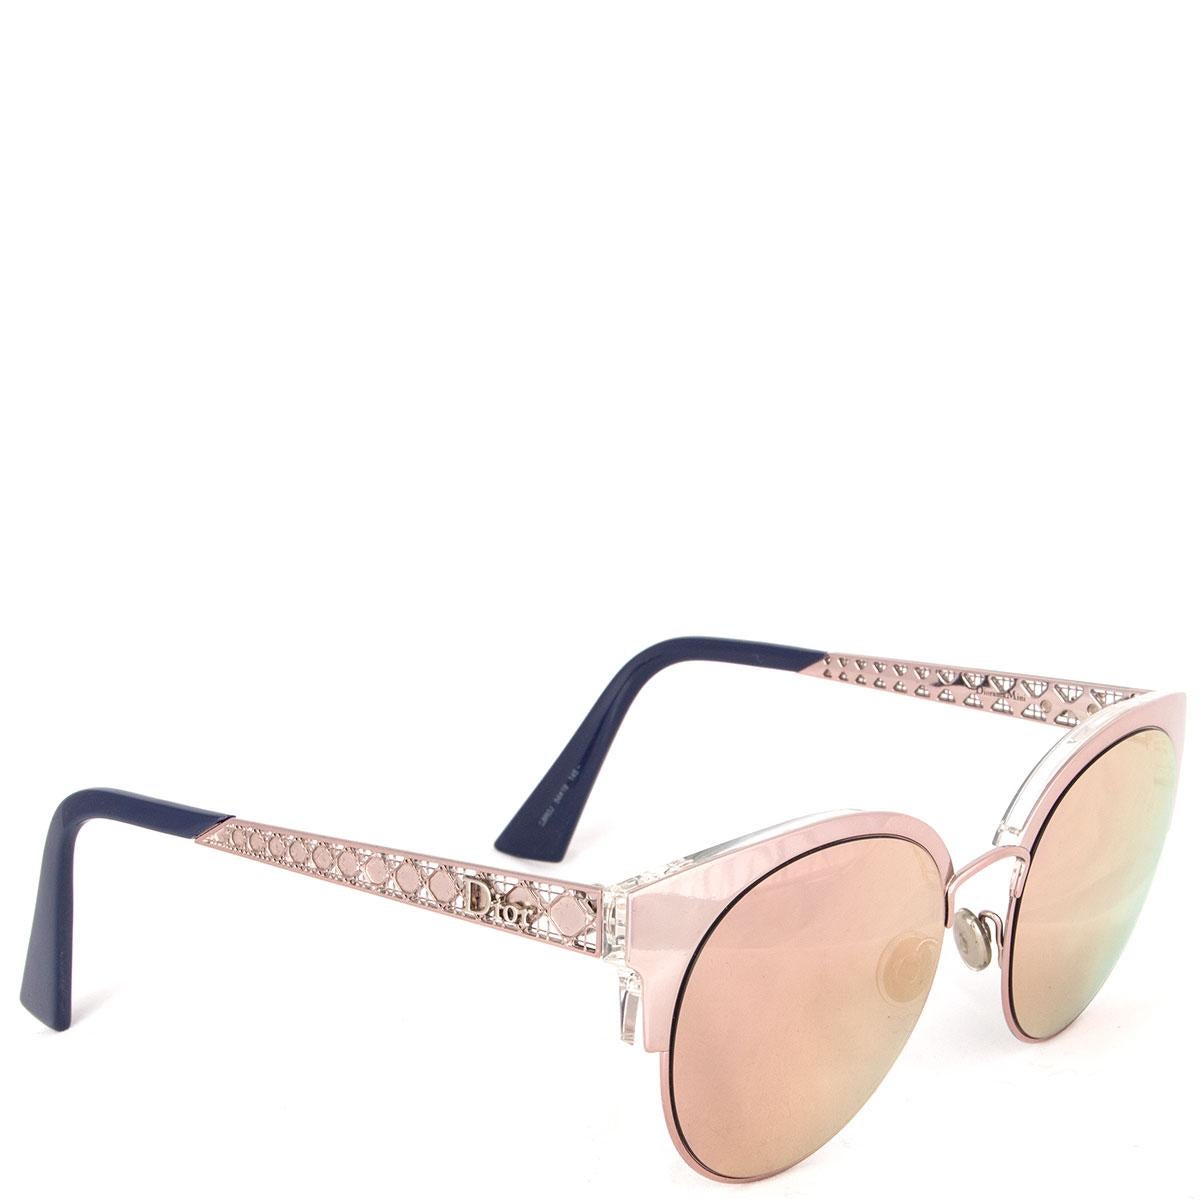 100% authentic Christian Dior Diorama Mini sunglasses with rose-silver metal frame and rosey mirrored lenses. Have been worn and are in excellent condition. Come with case. 

Width	14cm (5.5in)
Height	5cm (2in)

All our listings include only the